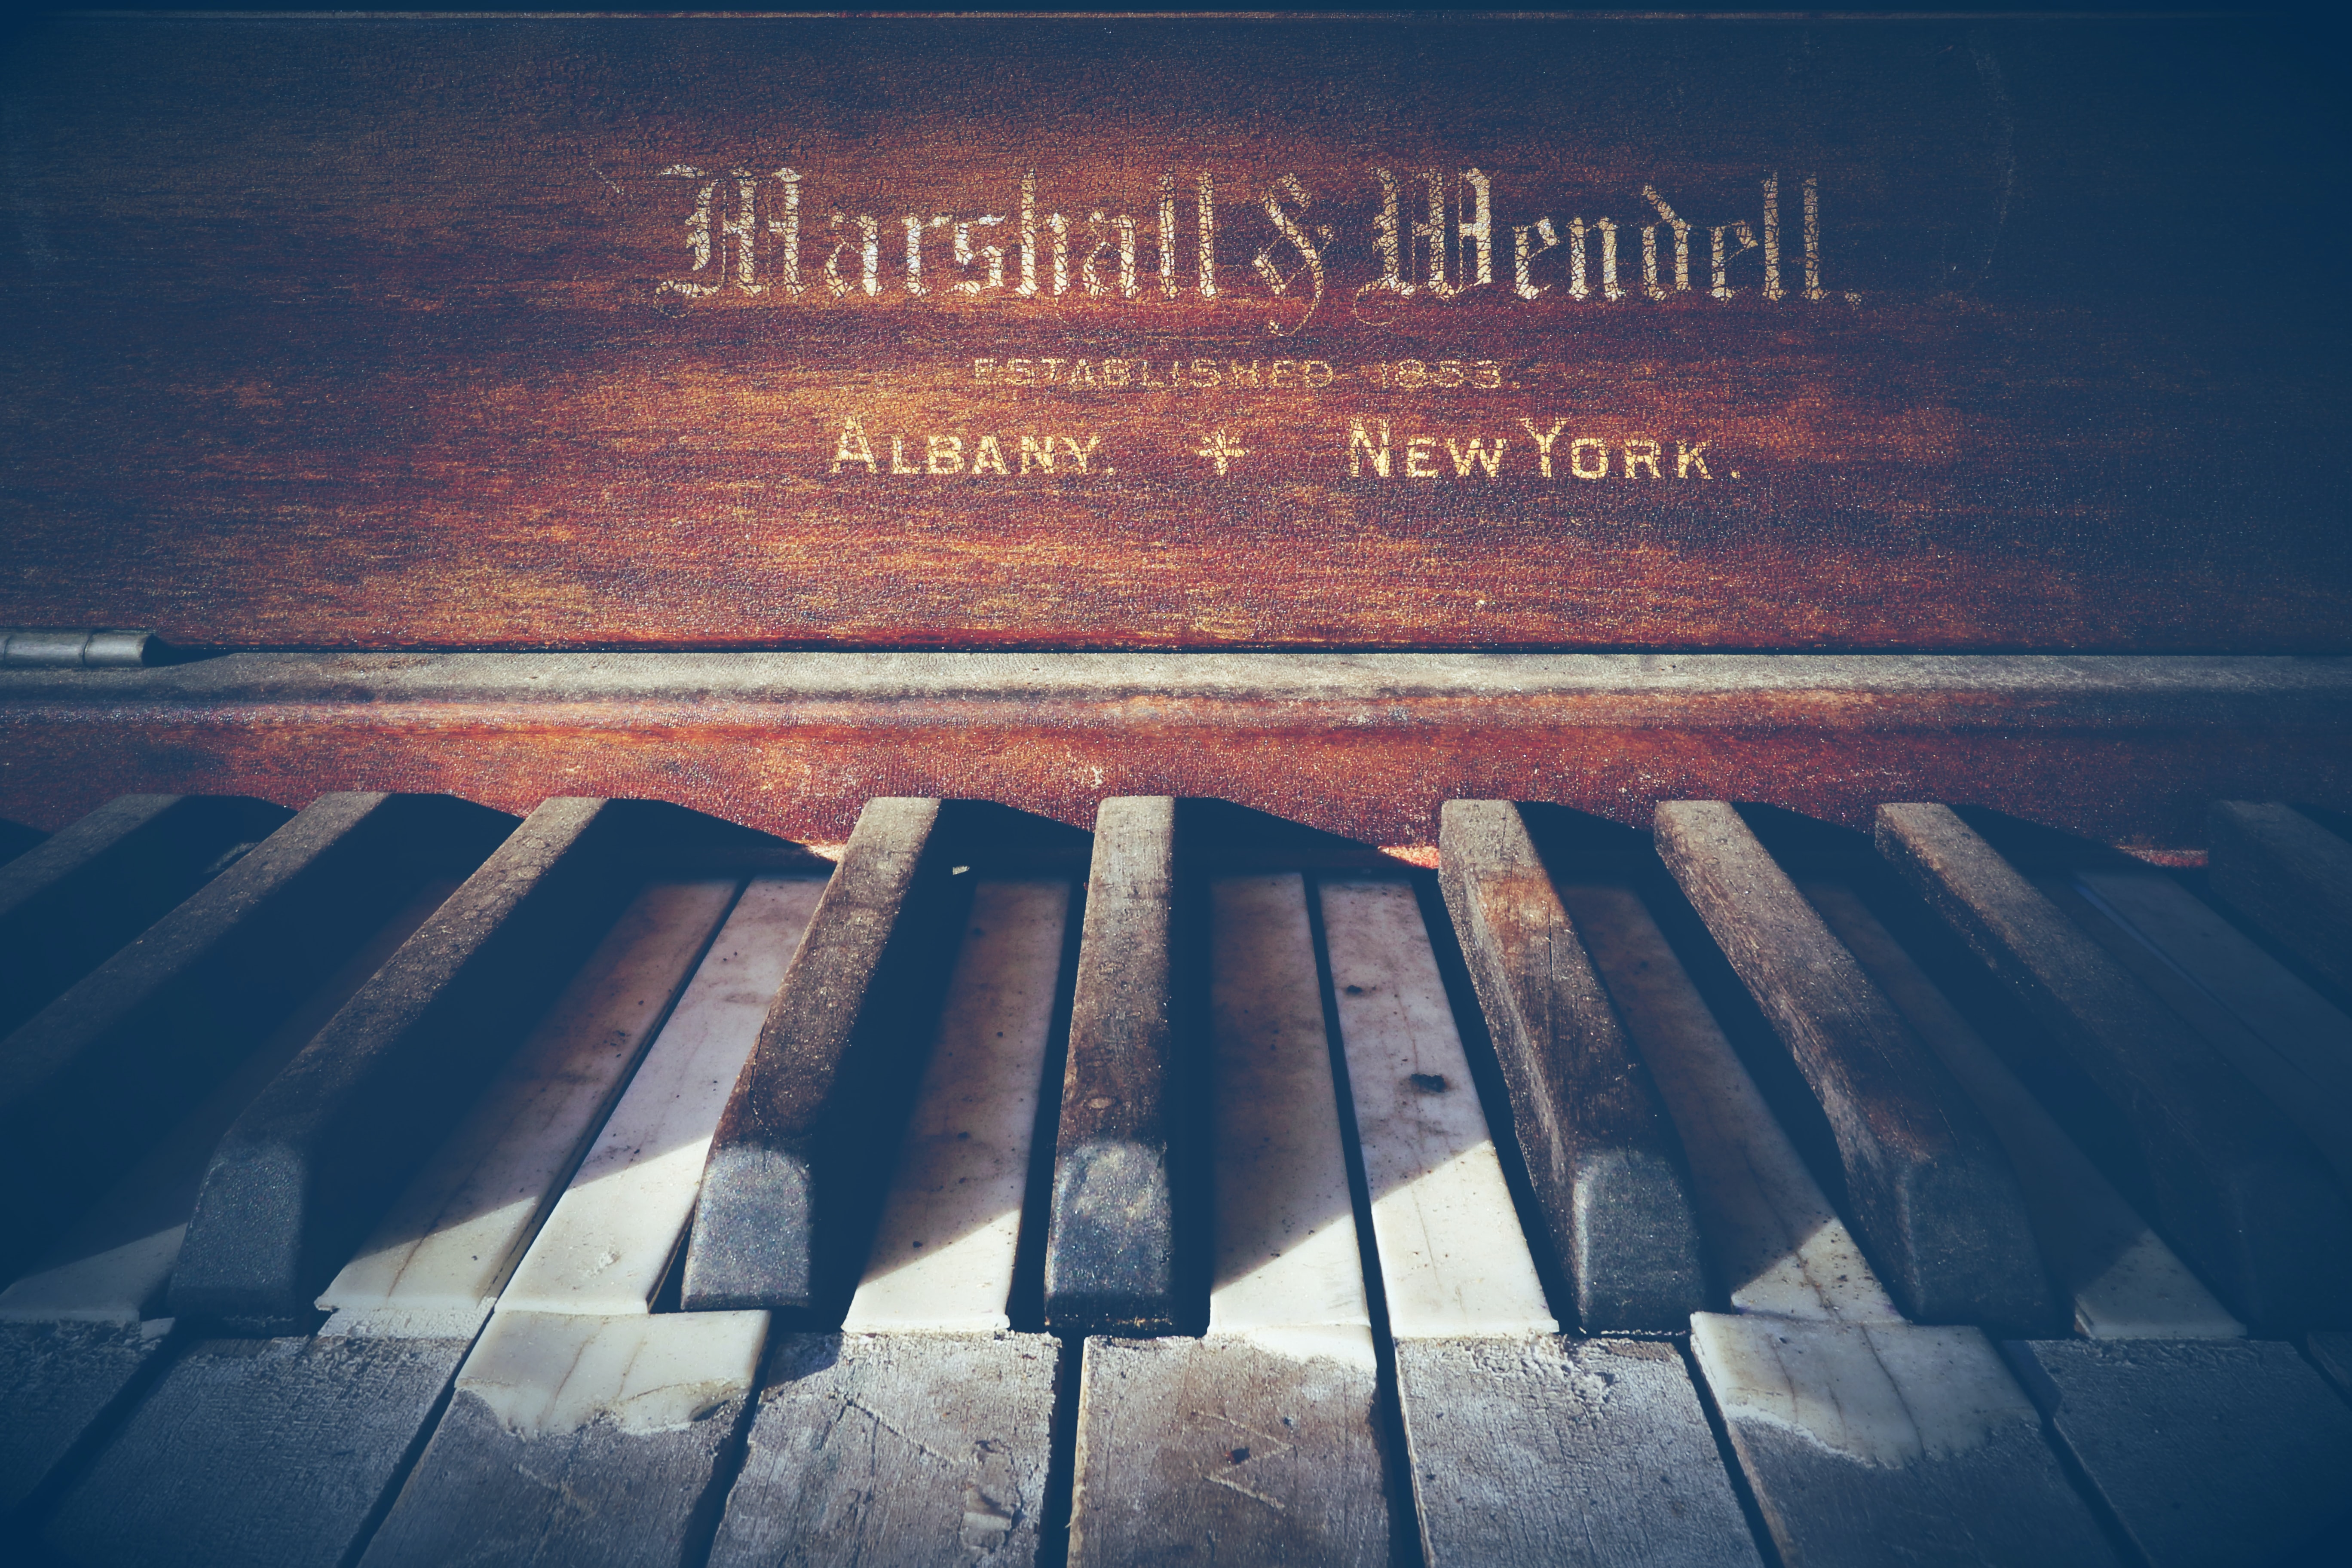 A beatdown piano with the legend Marshal & Mendel. Established 1853. Albany, New York